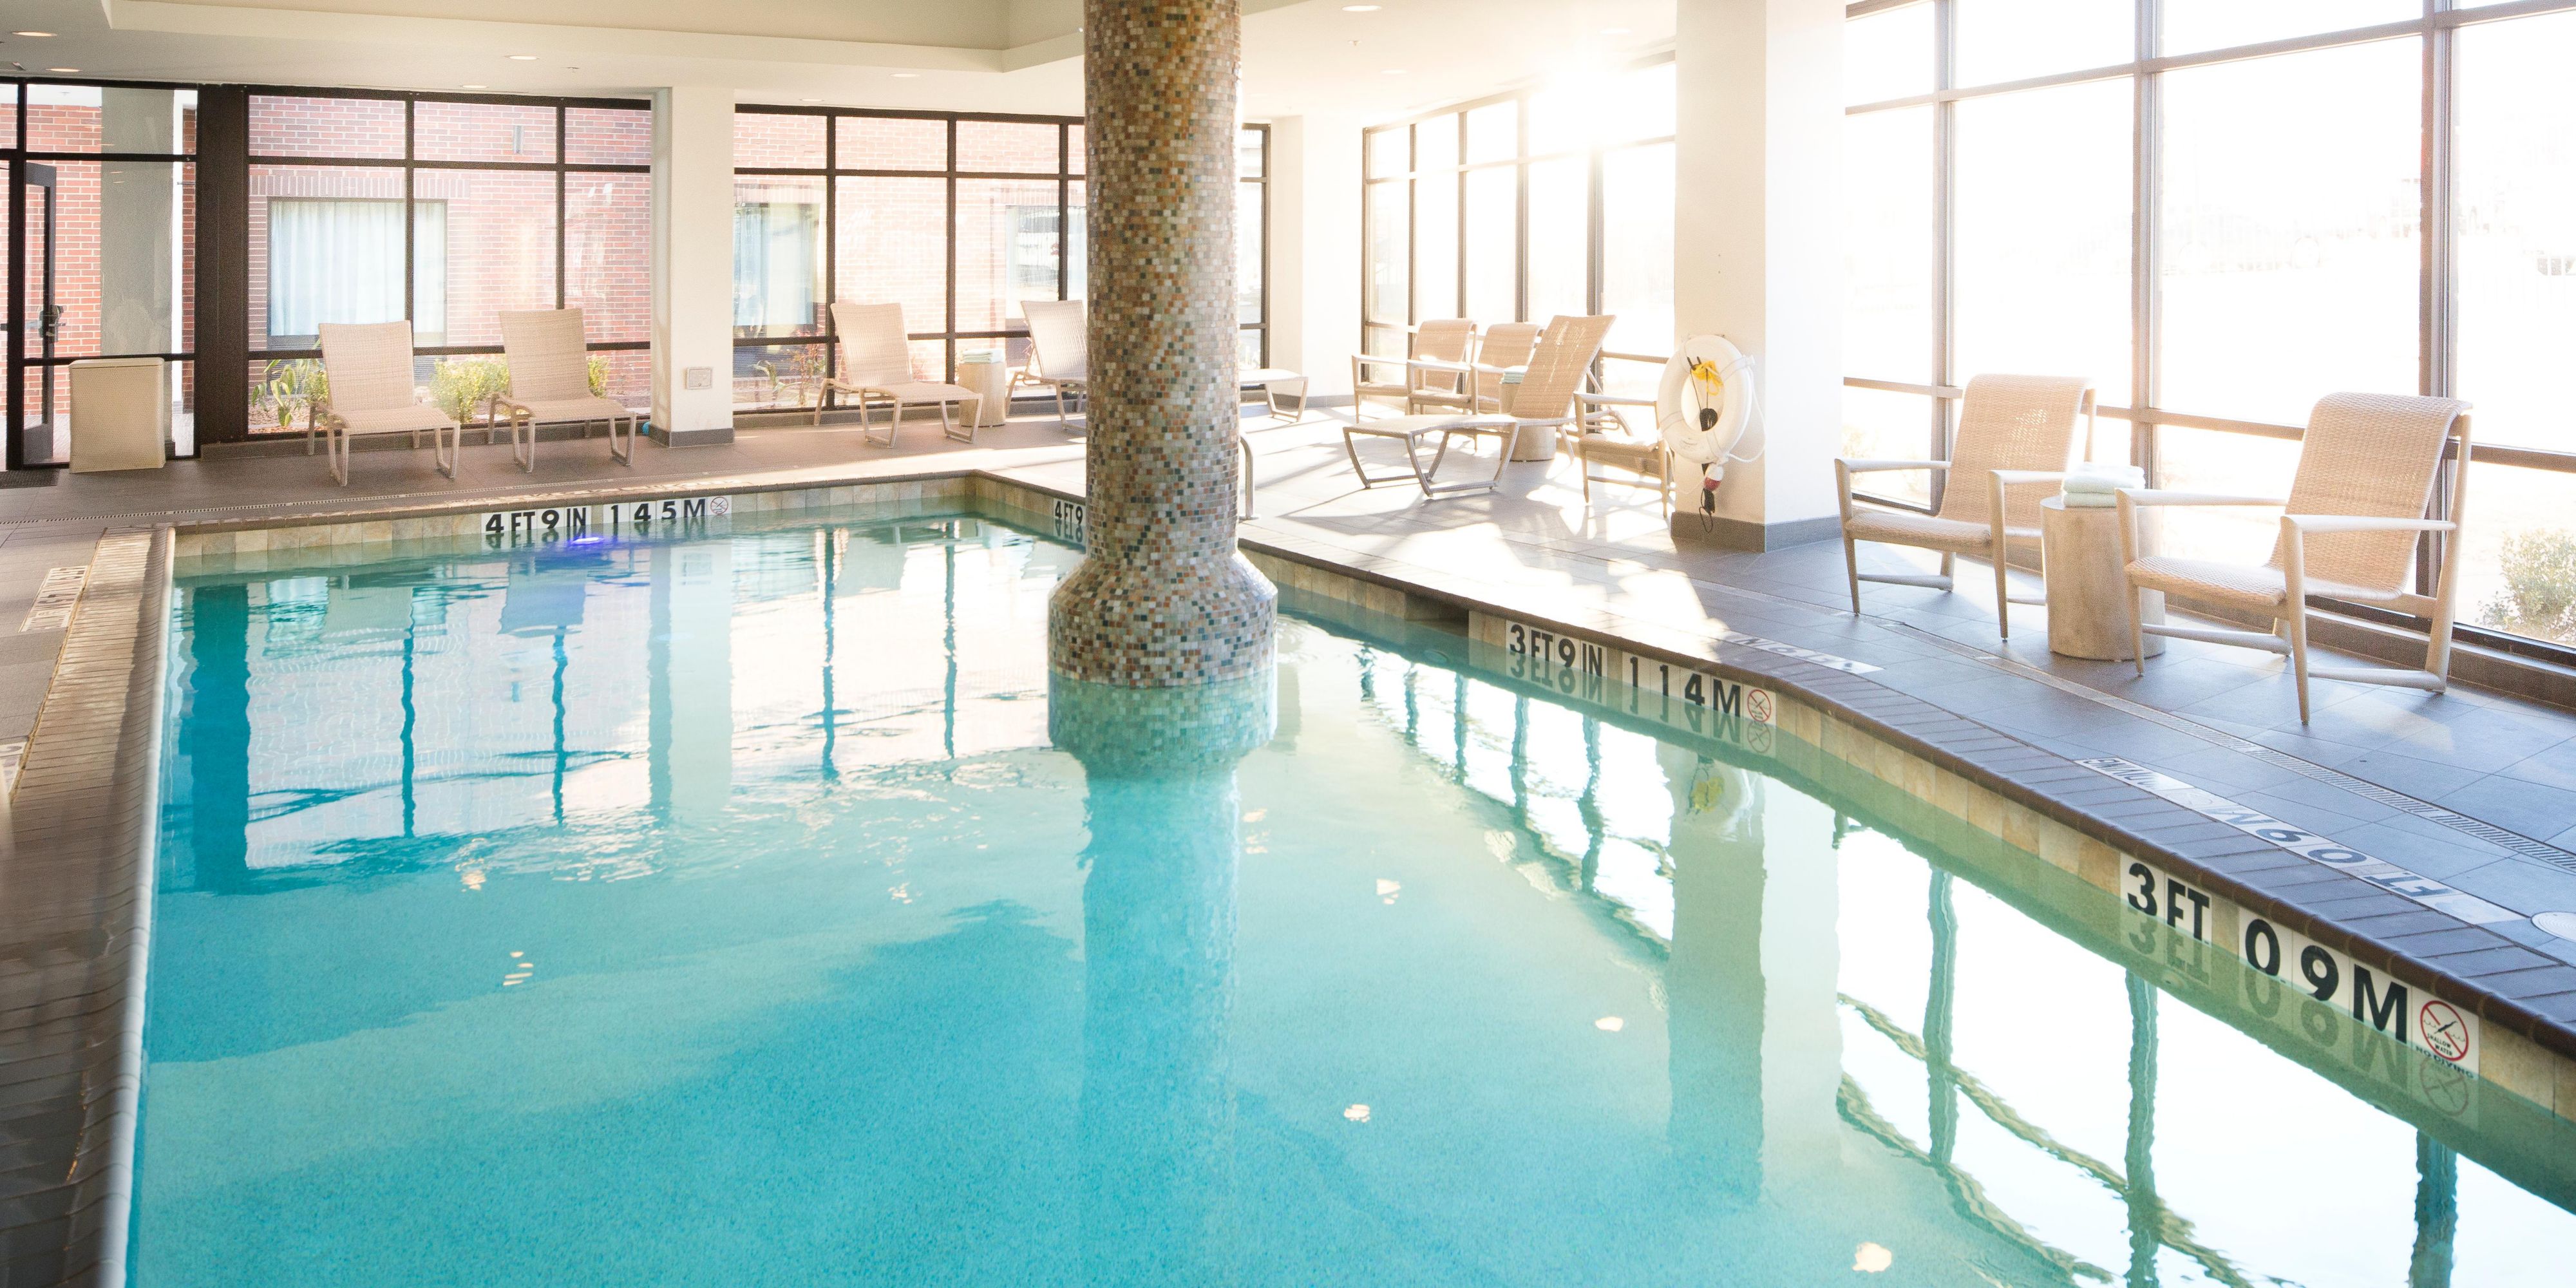 Take a refreshing dip in our indoor swimming pool and relax in the whirlpool. The pool is open daily from 6 a.m. - 11 p.m.